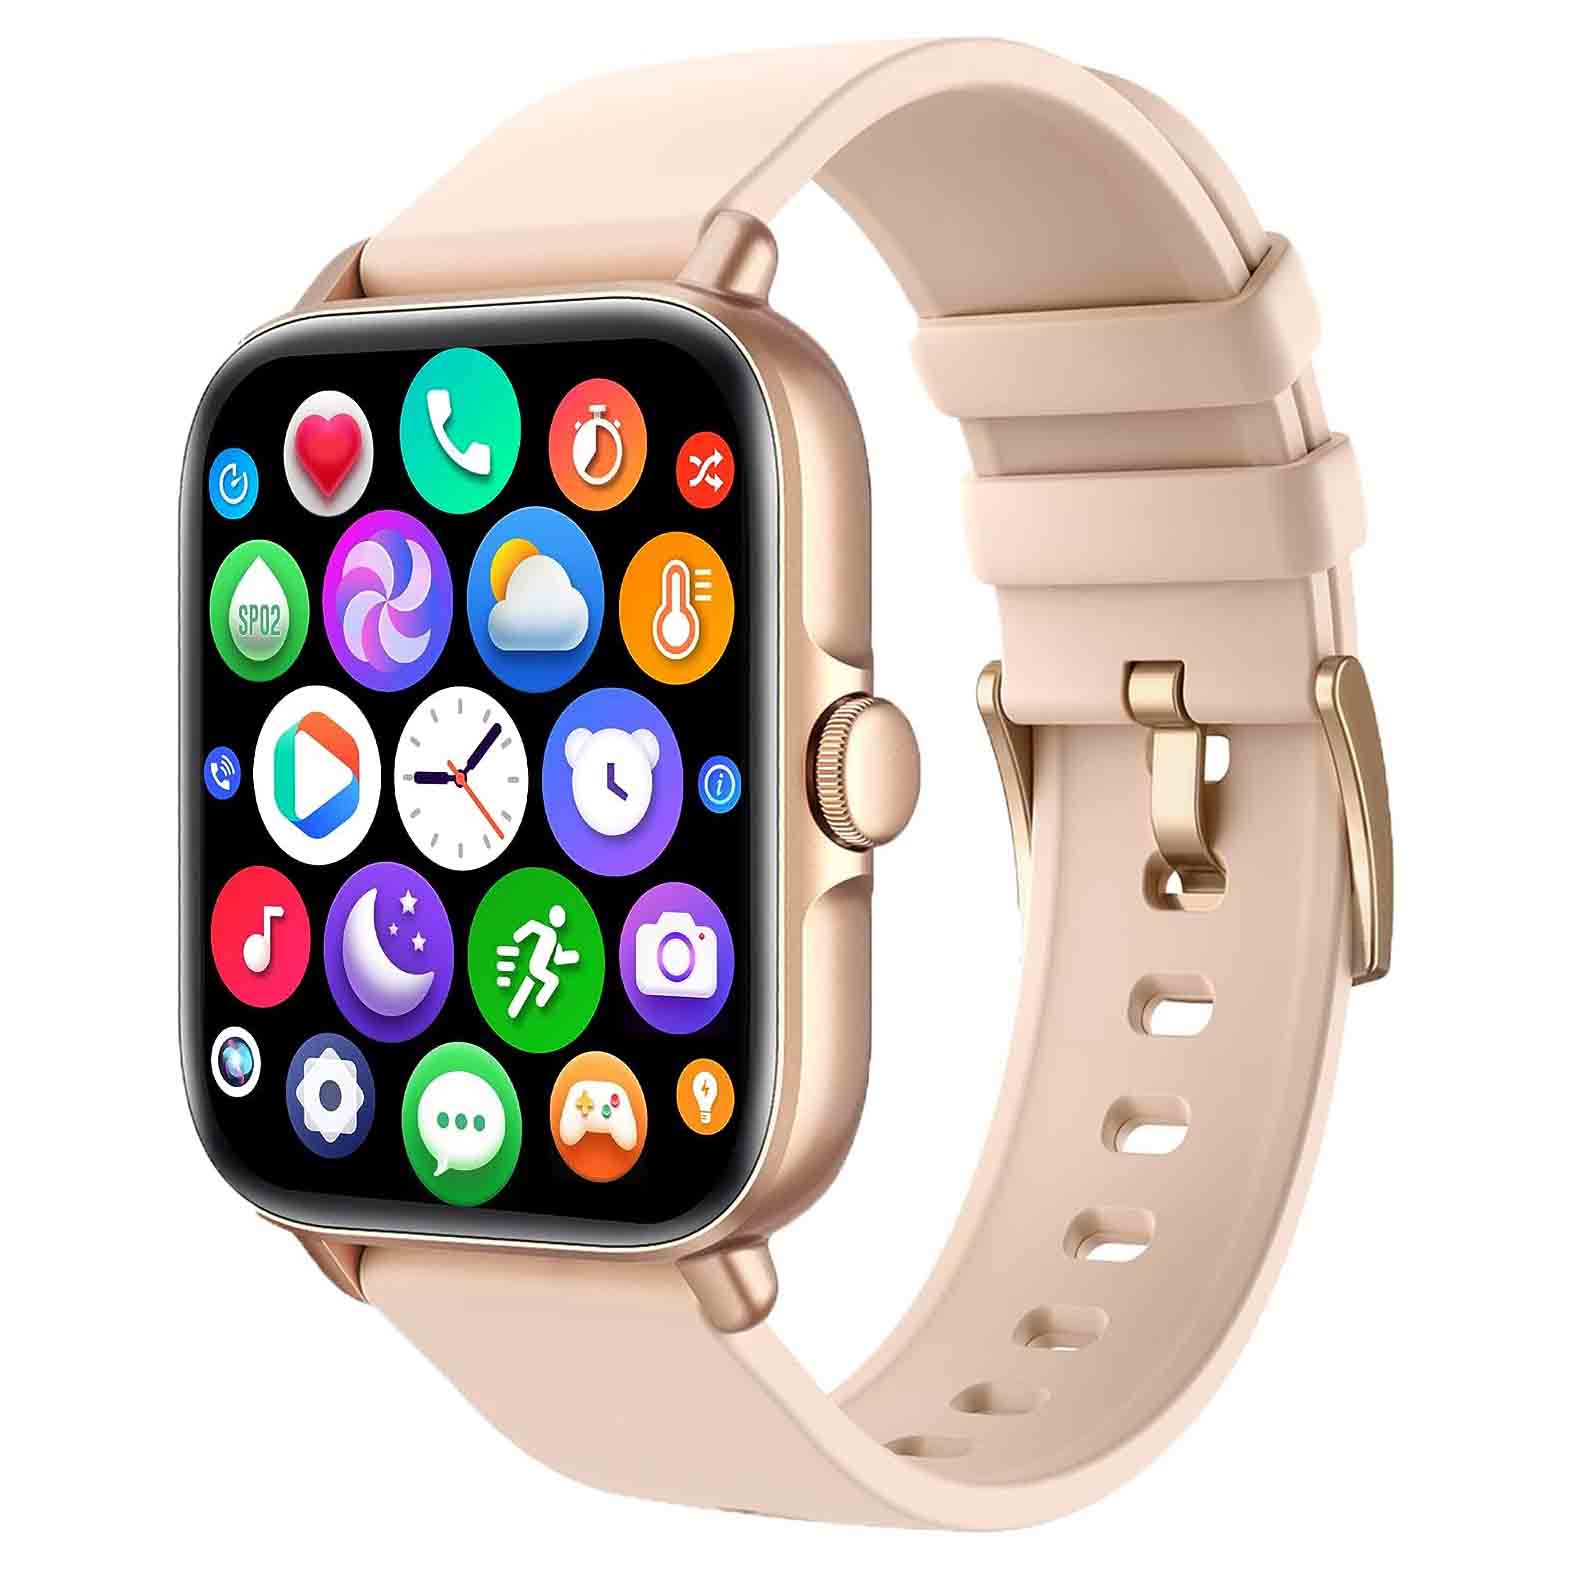 Light pink smart watch with display of app icons